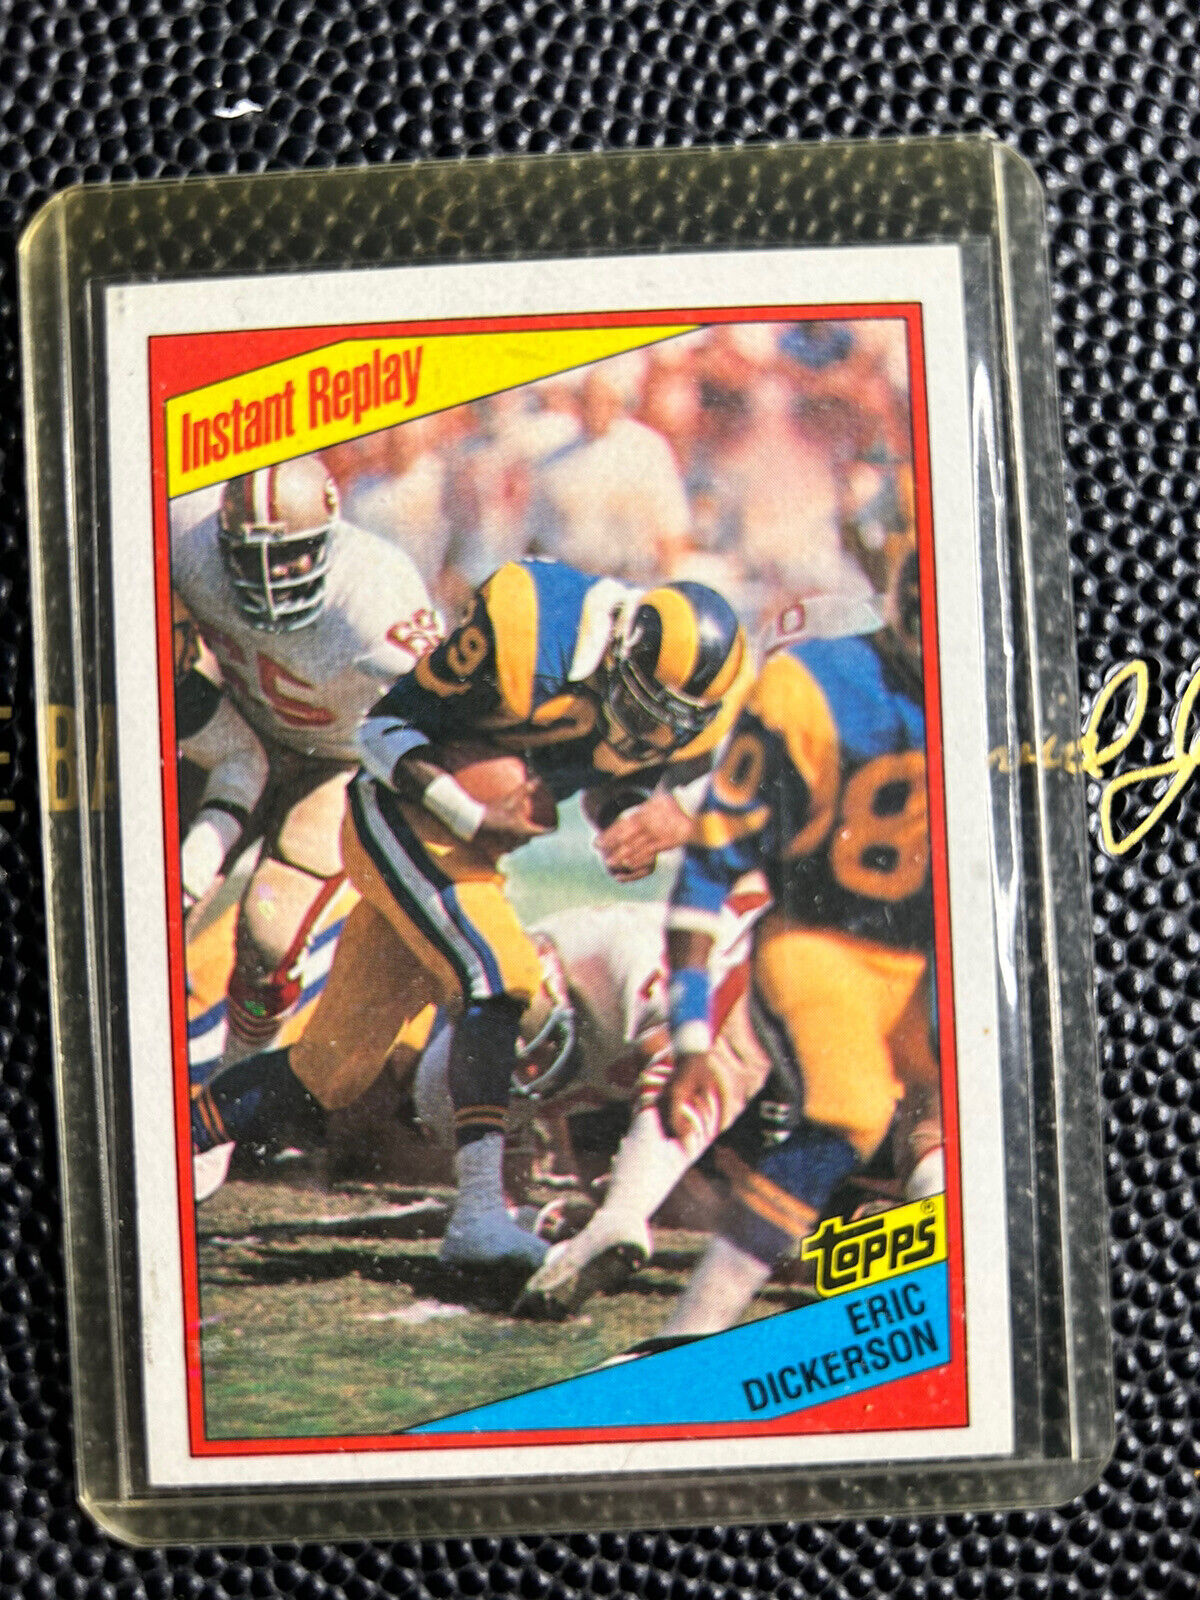 1984 Topps Football -Eric Dickerson - Instant Replay card#281. / rams